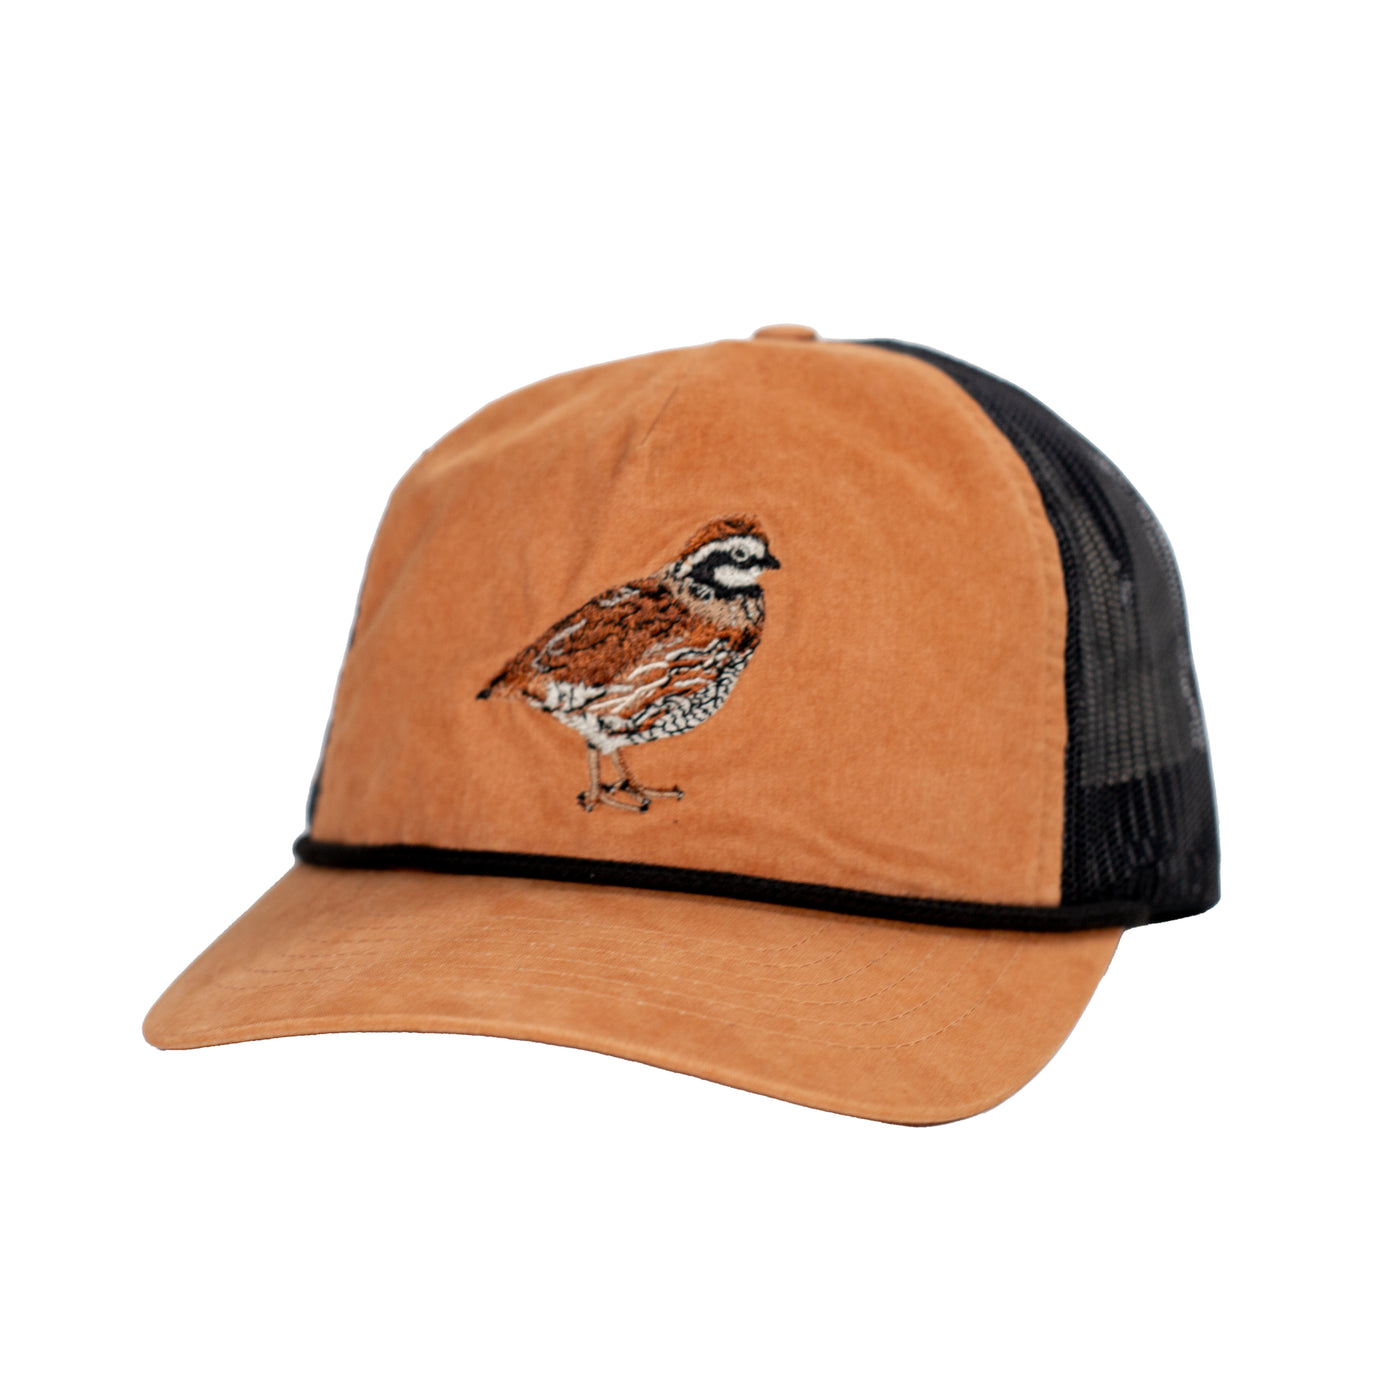 Kevin's Richardson Signature Quail Embroidered Rope Cap-Men's Accessories-Toast/Black/Black-Kevin's Fine Outdoor Gear & Apparel